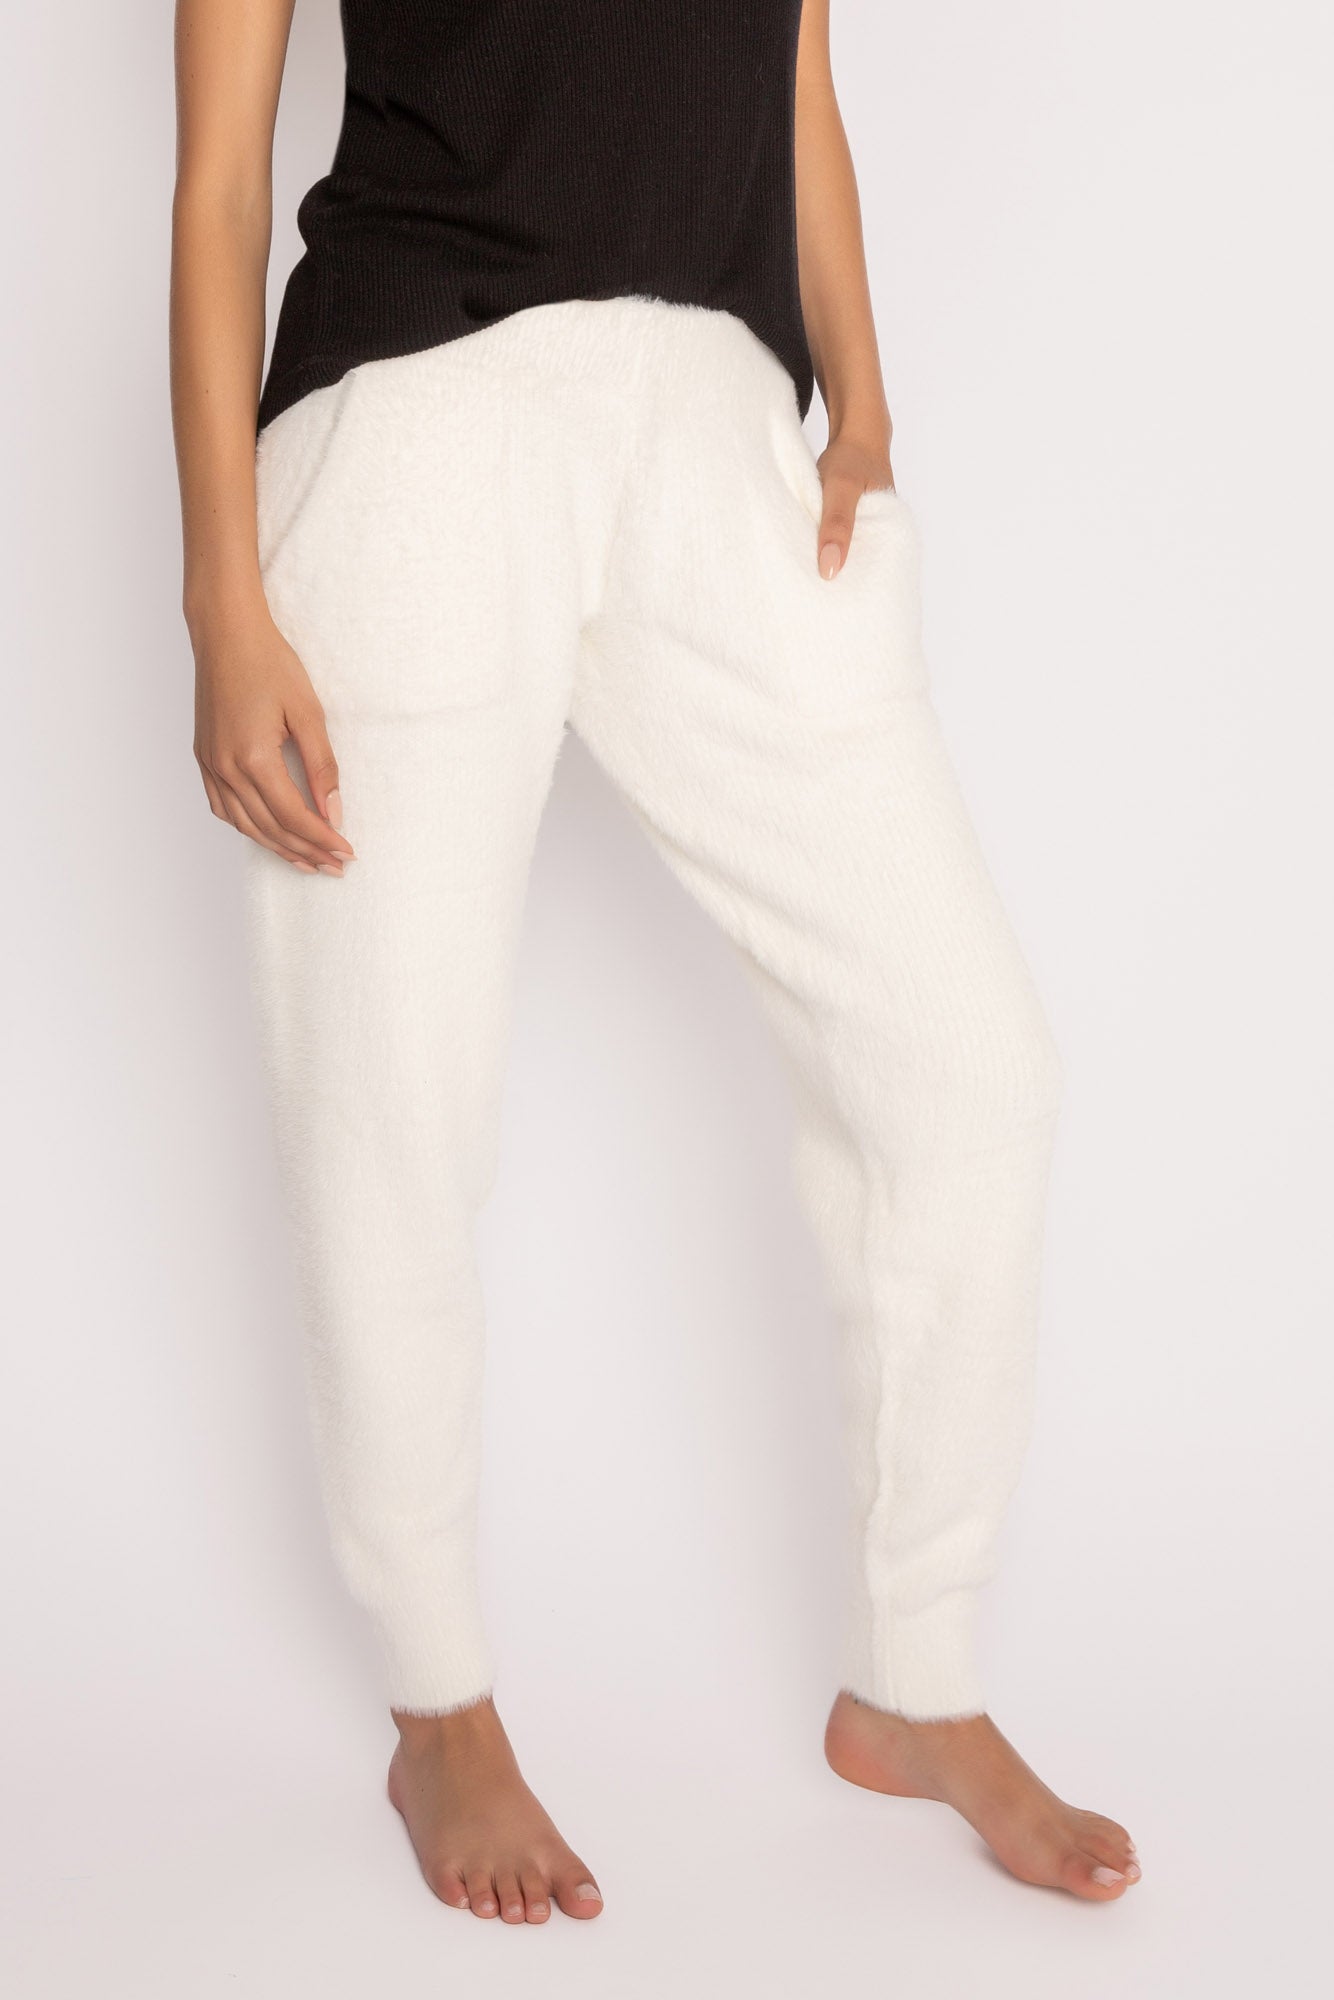 Mountain Mama Banded Sleepwear Pant In Ivory - PJ Salvage